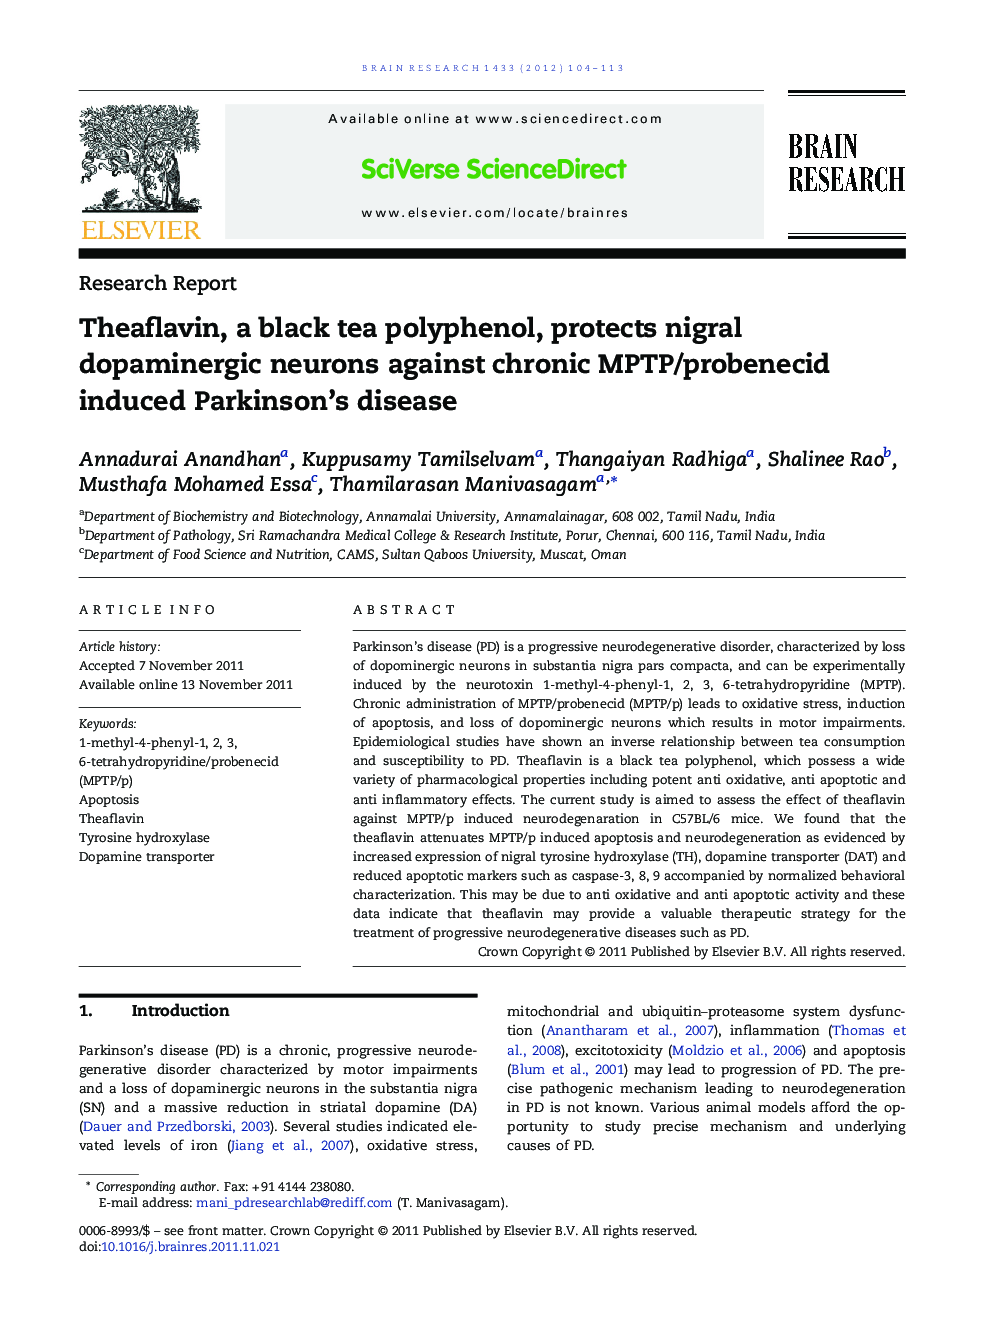 Theaflavin, a black tea polyphenol, protects nigral dopaminergic neurons against chronic MPTP/probenecid induced Parkinson's disease